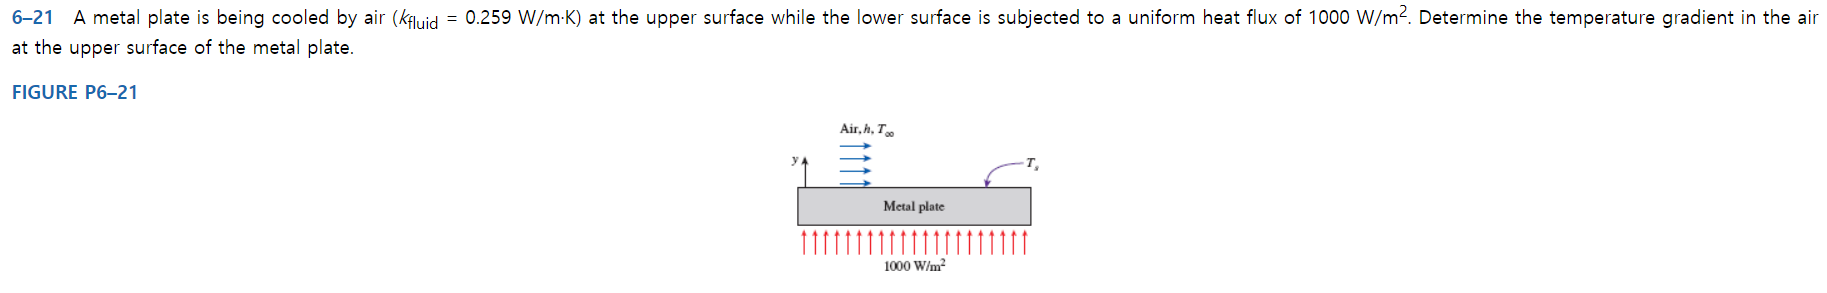 6-21 A metal plate is being cooled by air (kuid = 0.259 W/m-K) at the upper surface while the lower surface is subjected to a uniform heat flux of 1000 W/m2. Determine the temperature gradient in the air
at the upper surface of the metal plate.
FIGURE P6-21
Air,h, Tog
T
Metal plate
1000 W/m2
